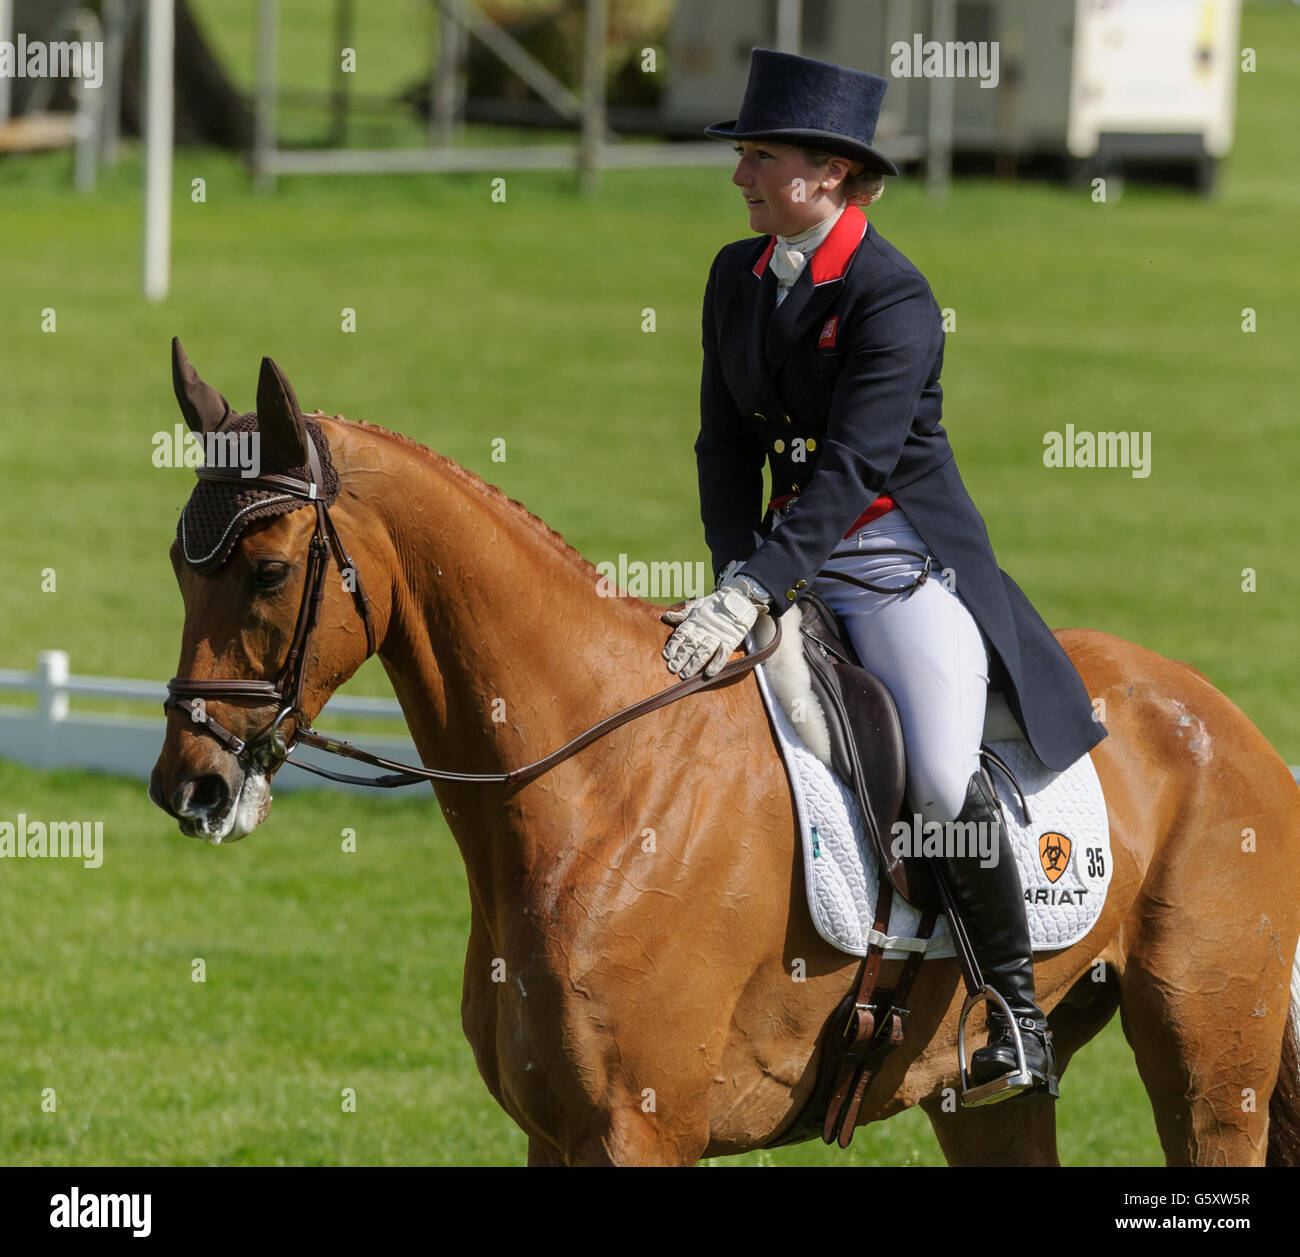 Laura Collett and GRAND MANOEUVRE - Dressage phase - Mitsubishi Motors Badminton Horse Trials, Badminton House, Wednesday 7th May 2015. Stock Photo